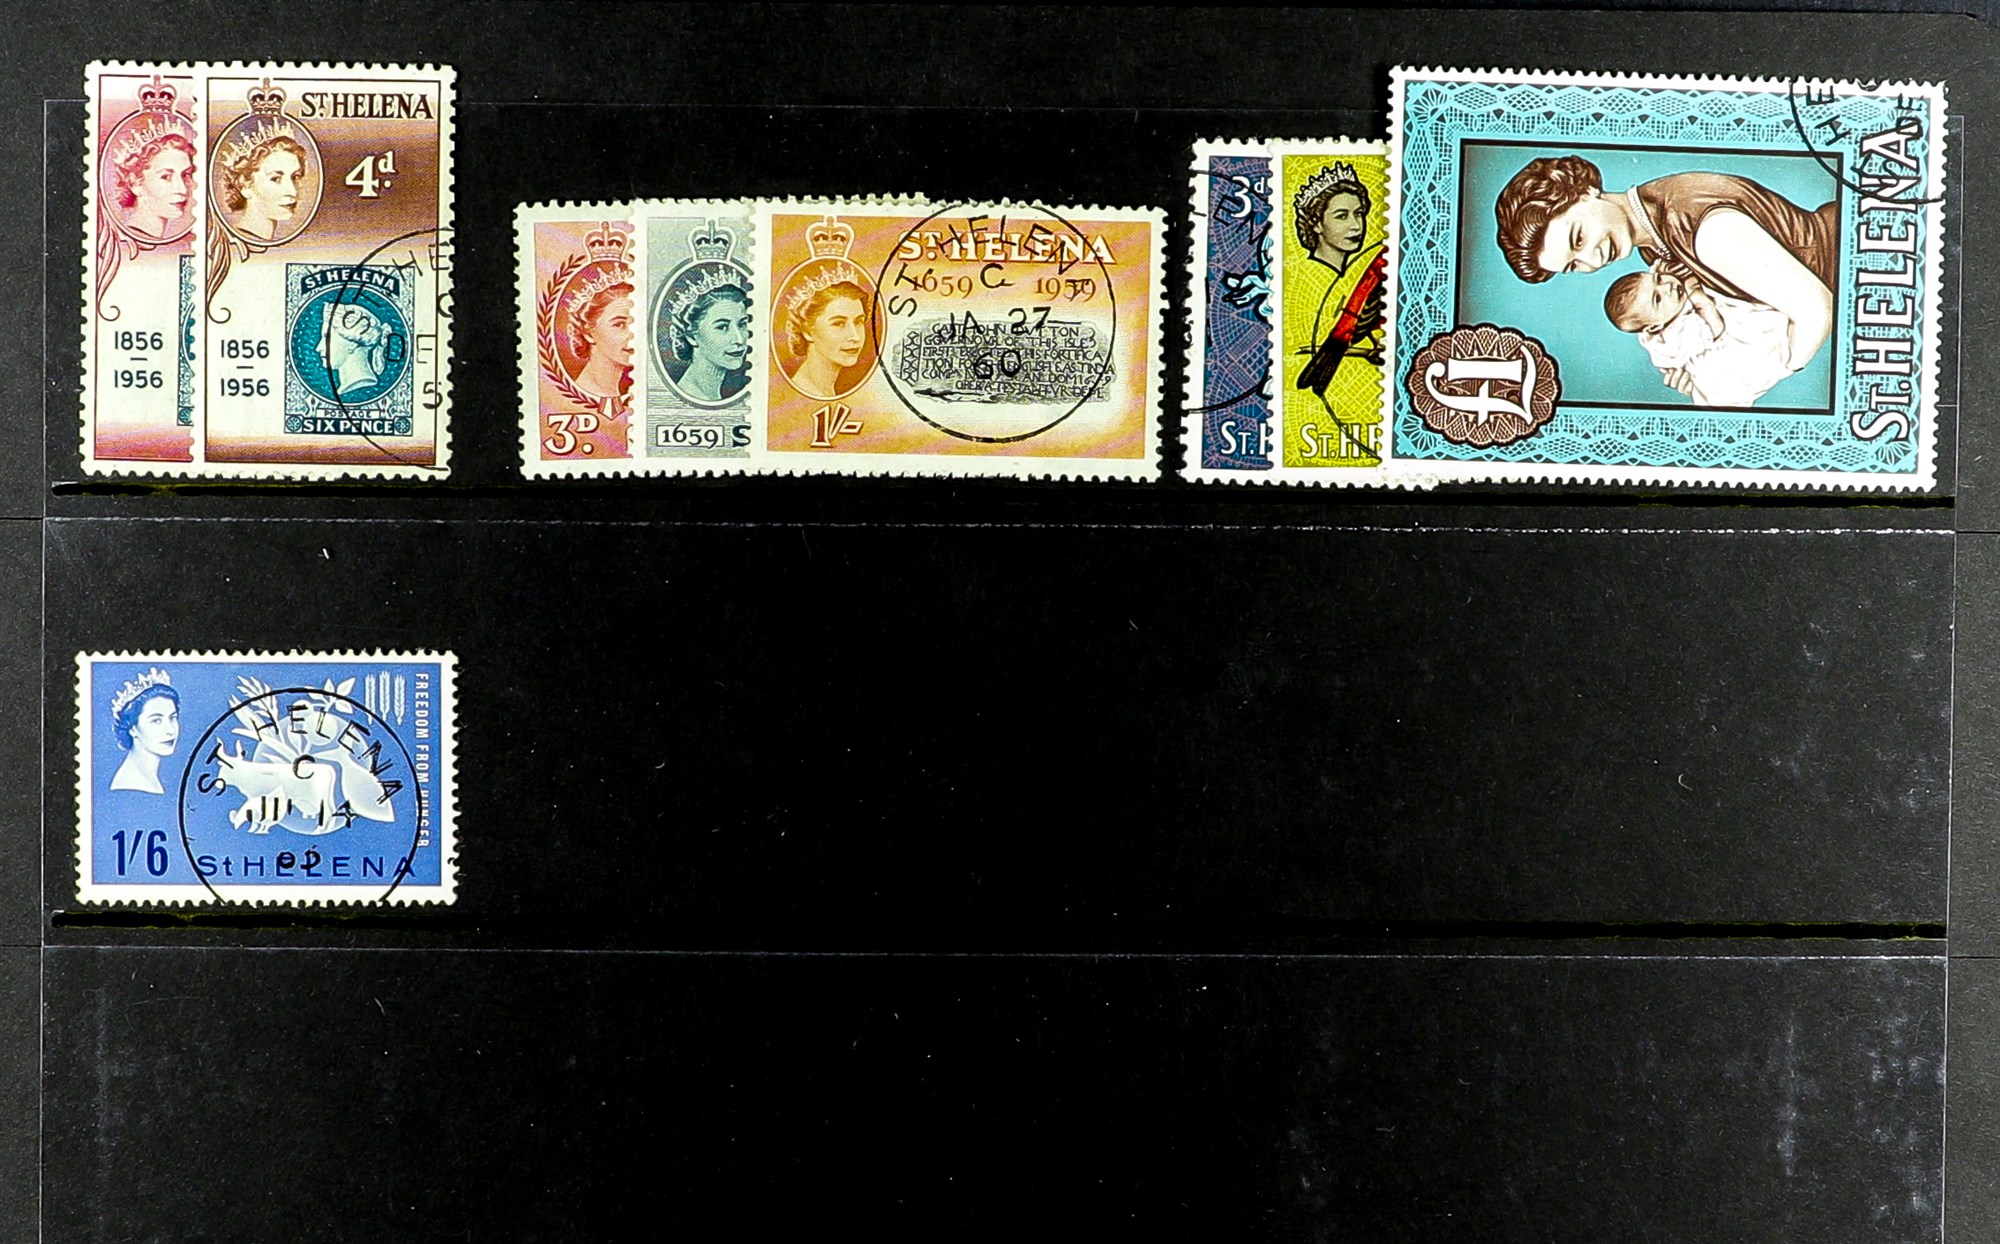 ST HELENA 1902 - 1963 COLLECTION of used stamps on protective page, all very fine cds used, many - Image 2 of 2